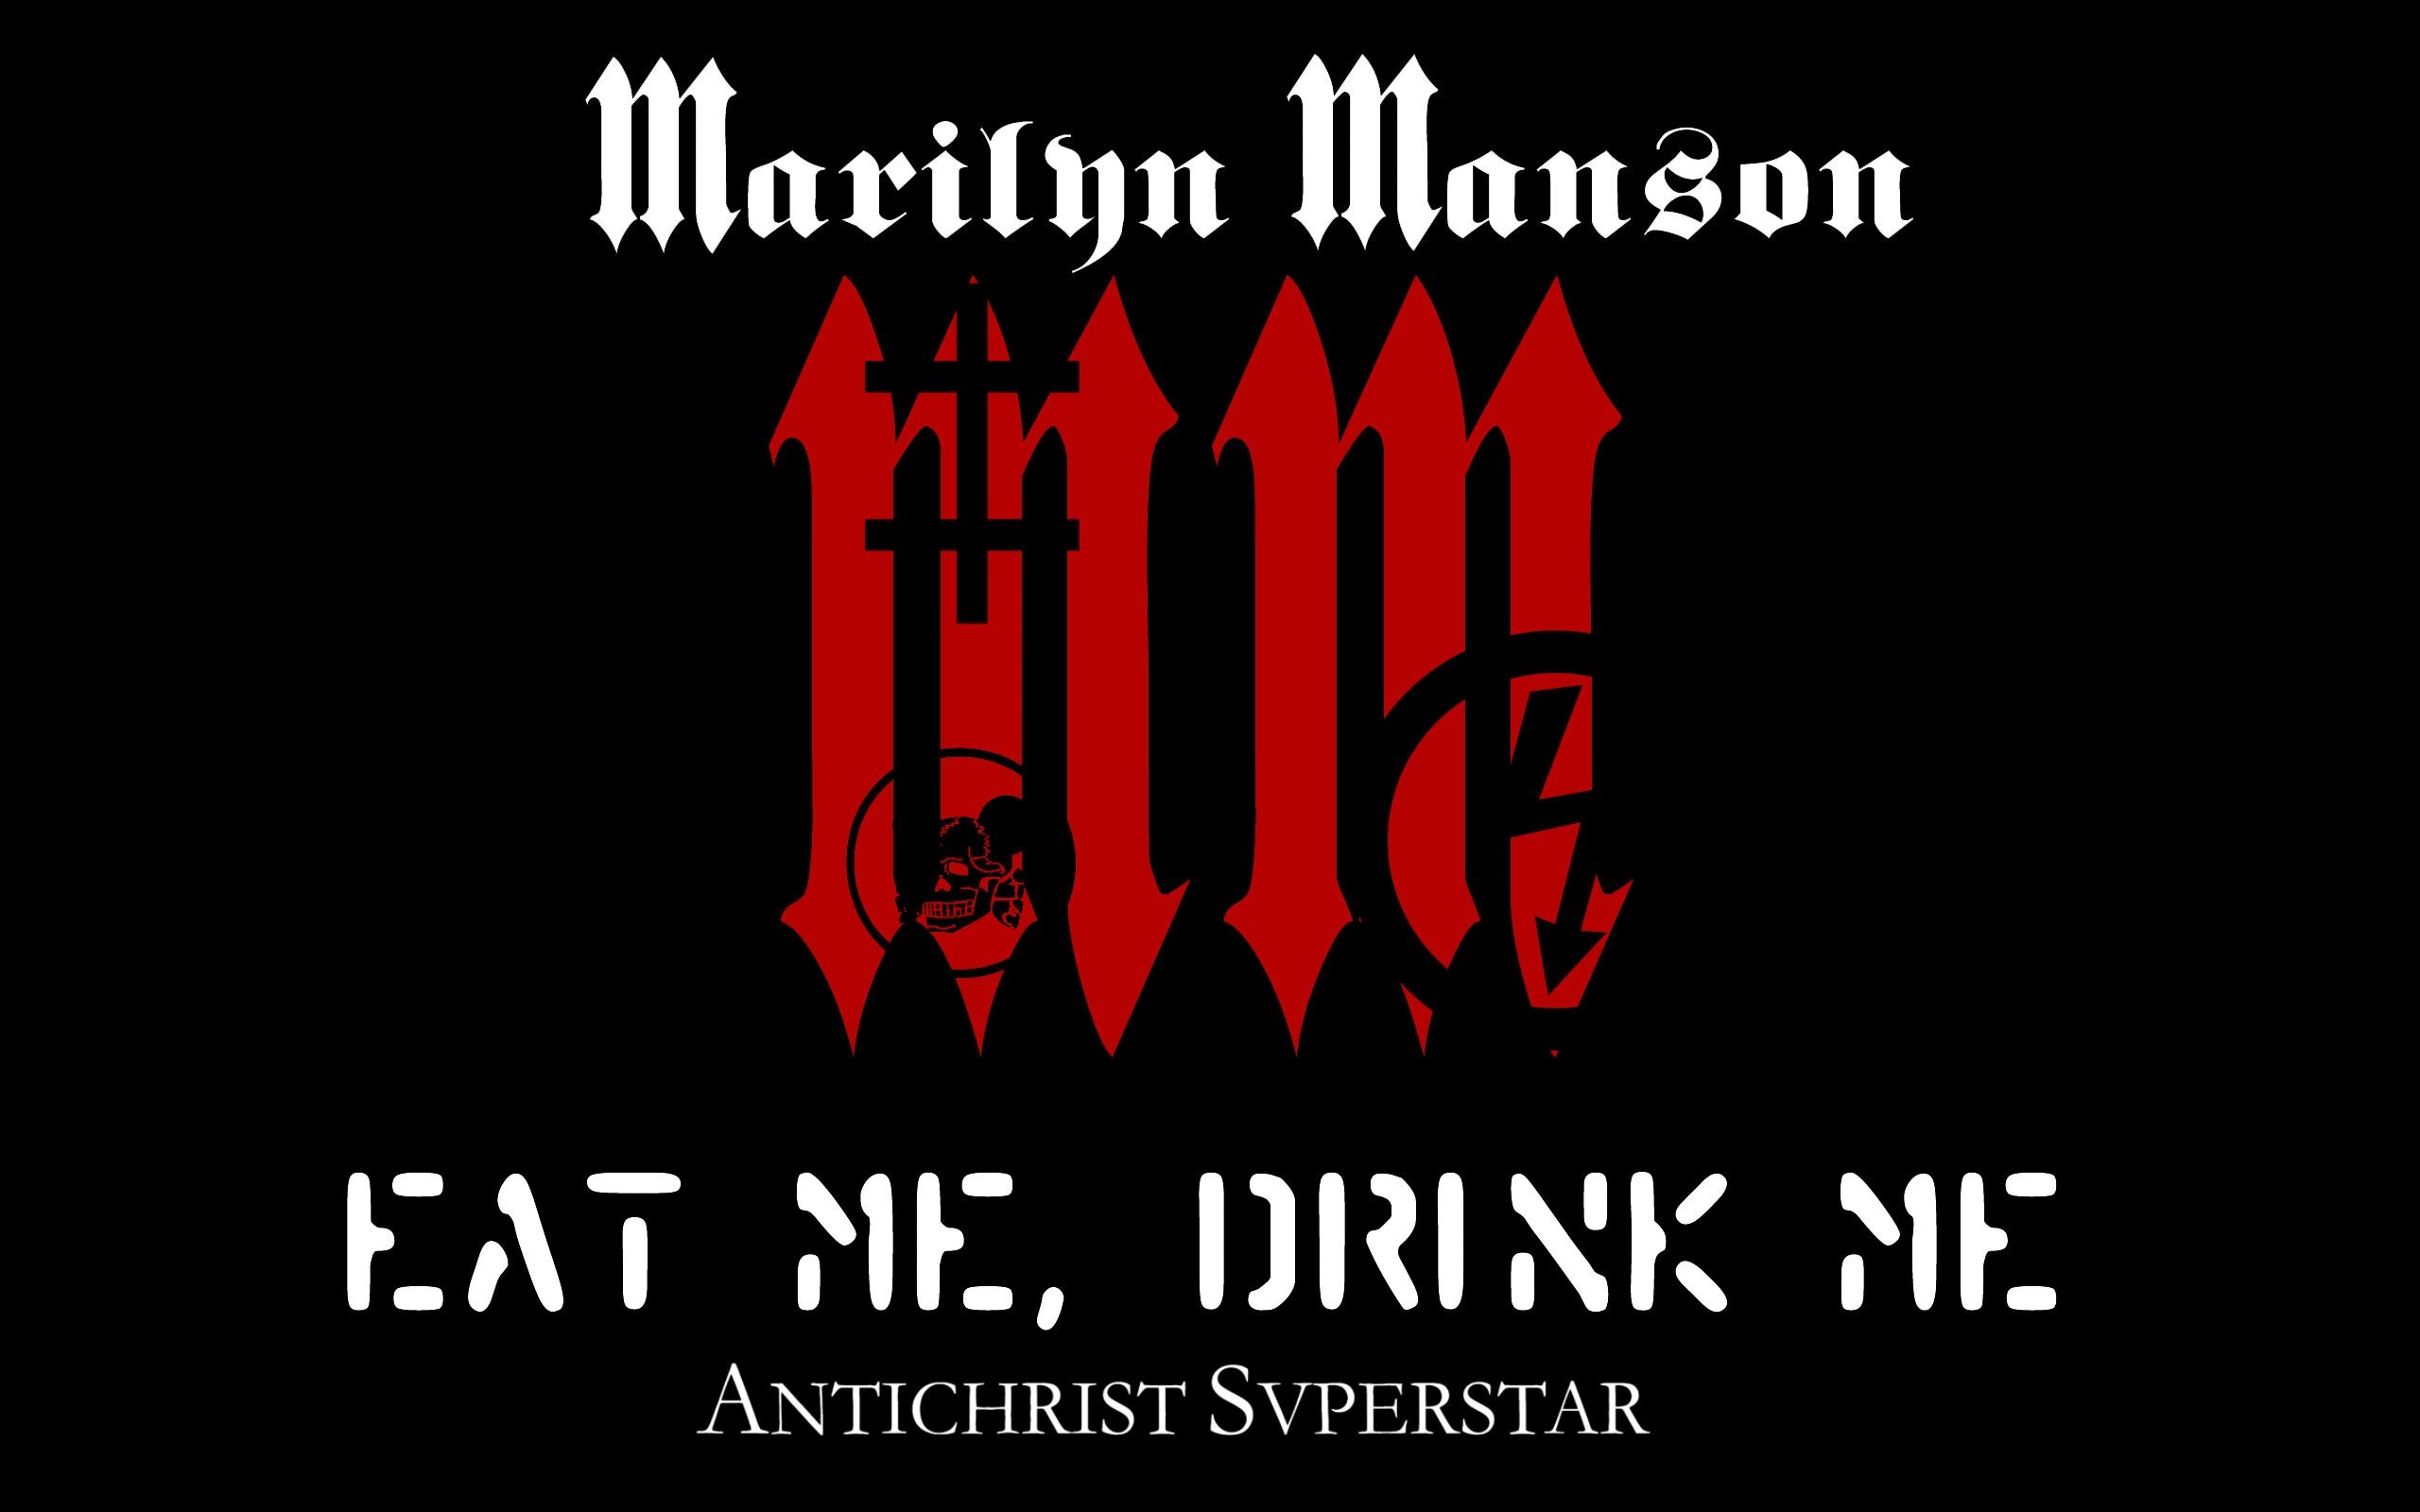 Marilyn Manson, Typography, Music, Simple background, Black background Wallpaper